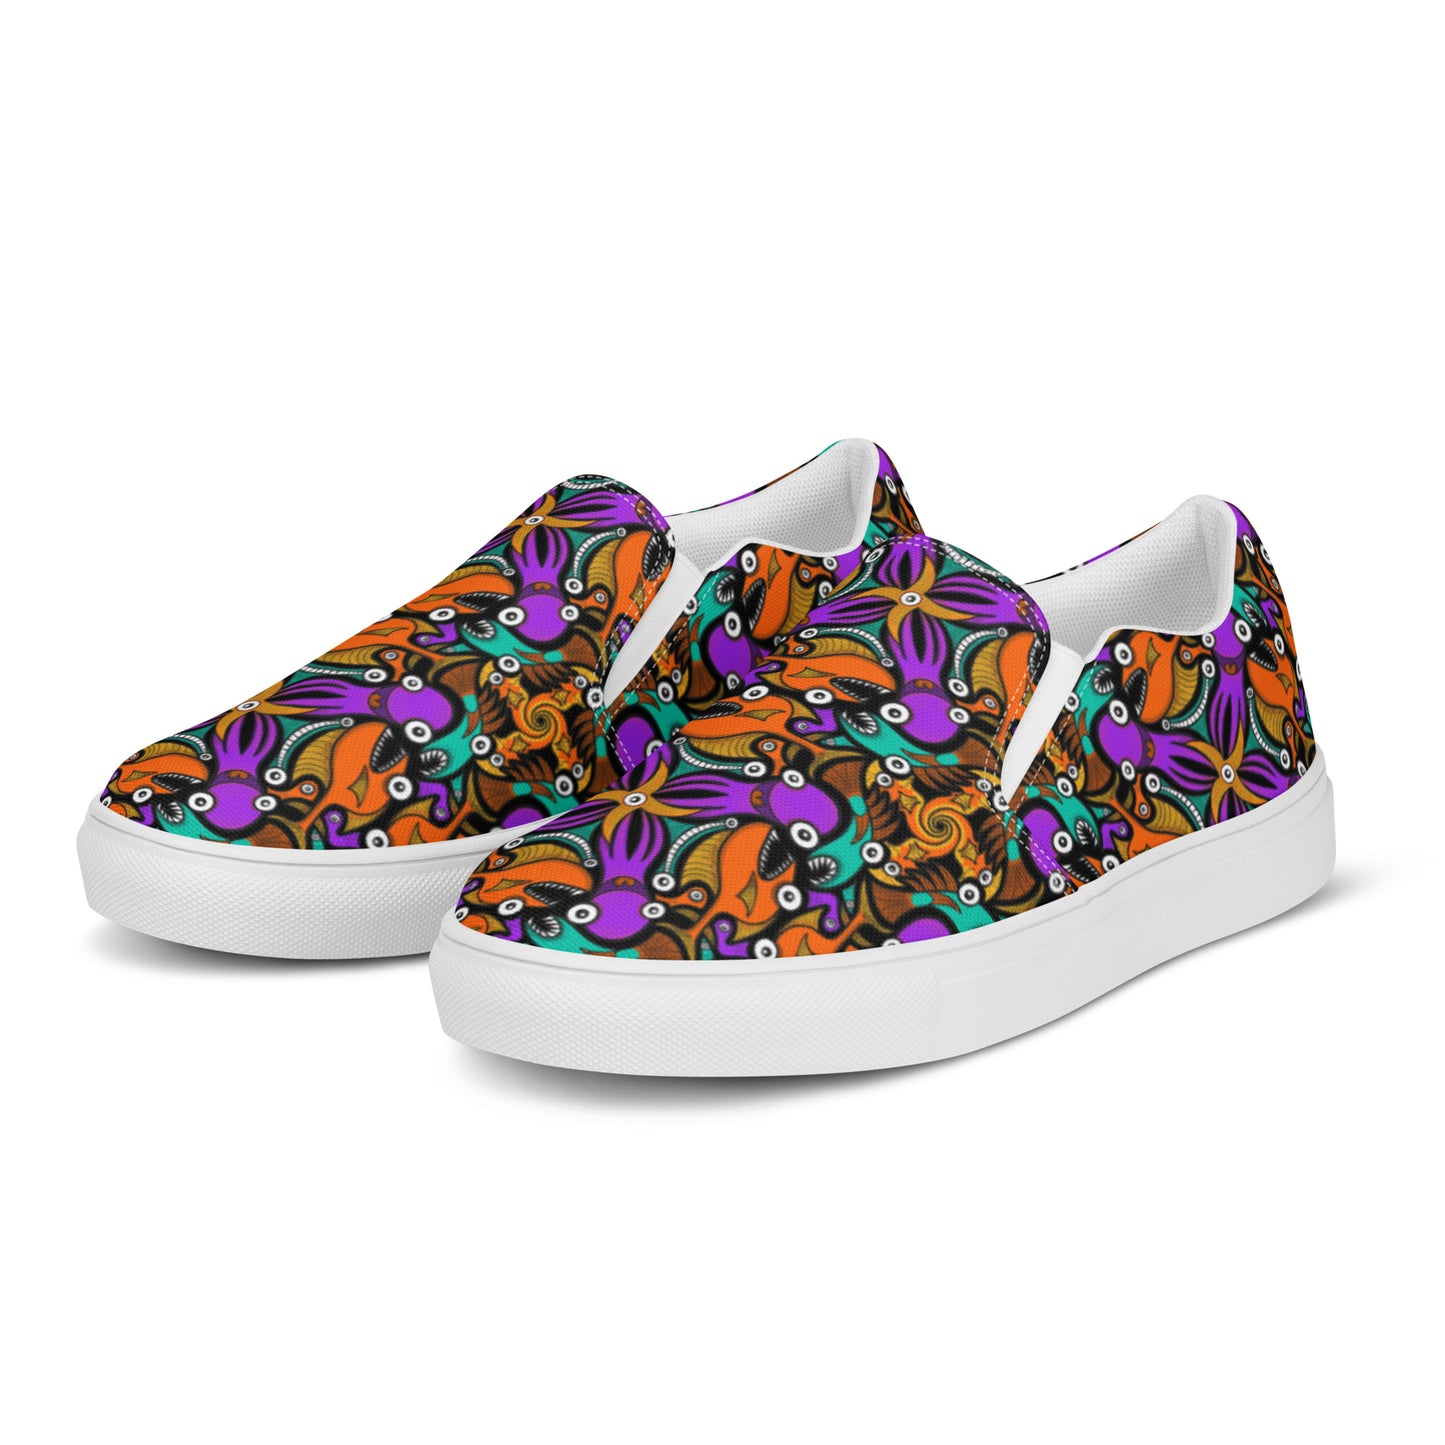 Mesmerizing creatures straight from the deep ocean Men’s slip-on canvas shoes. Overview